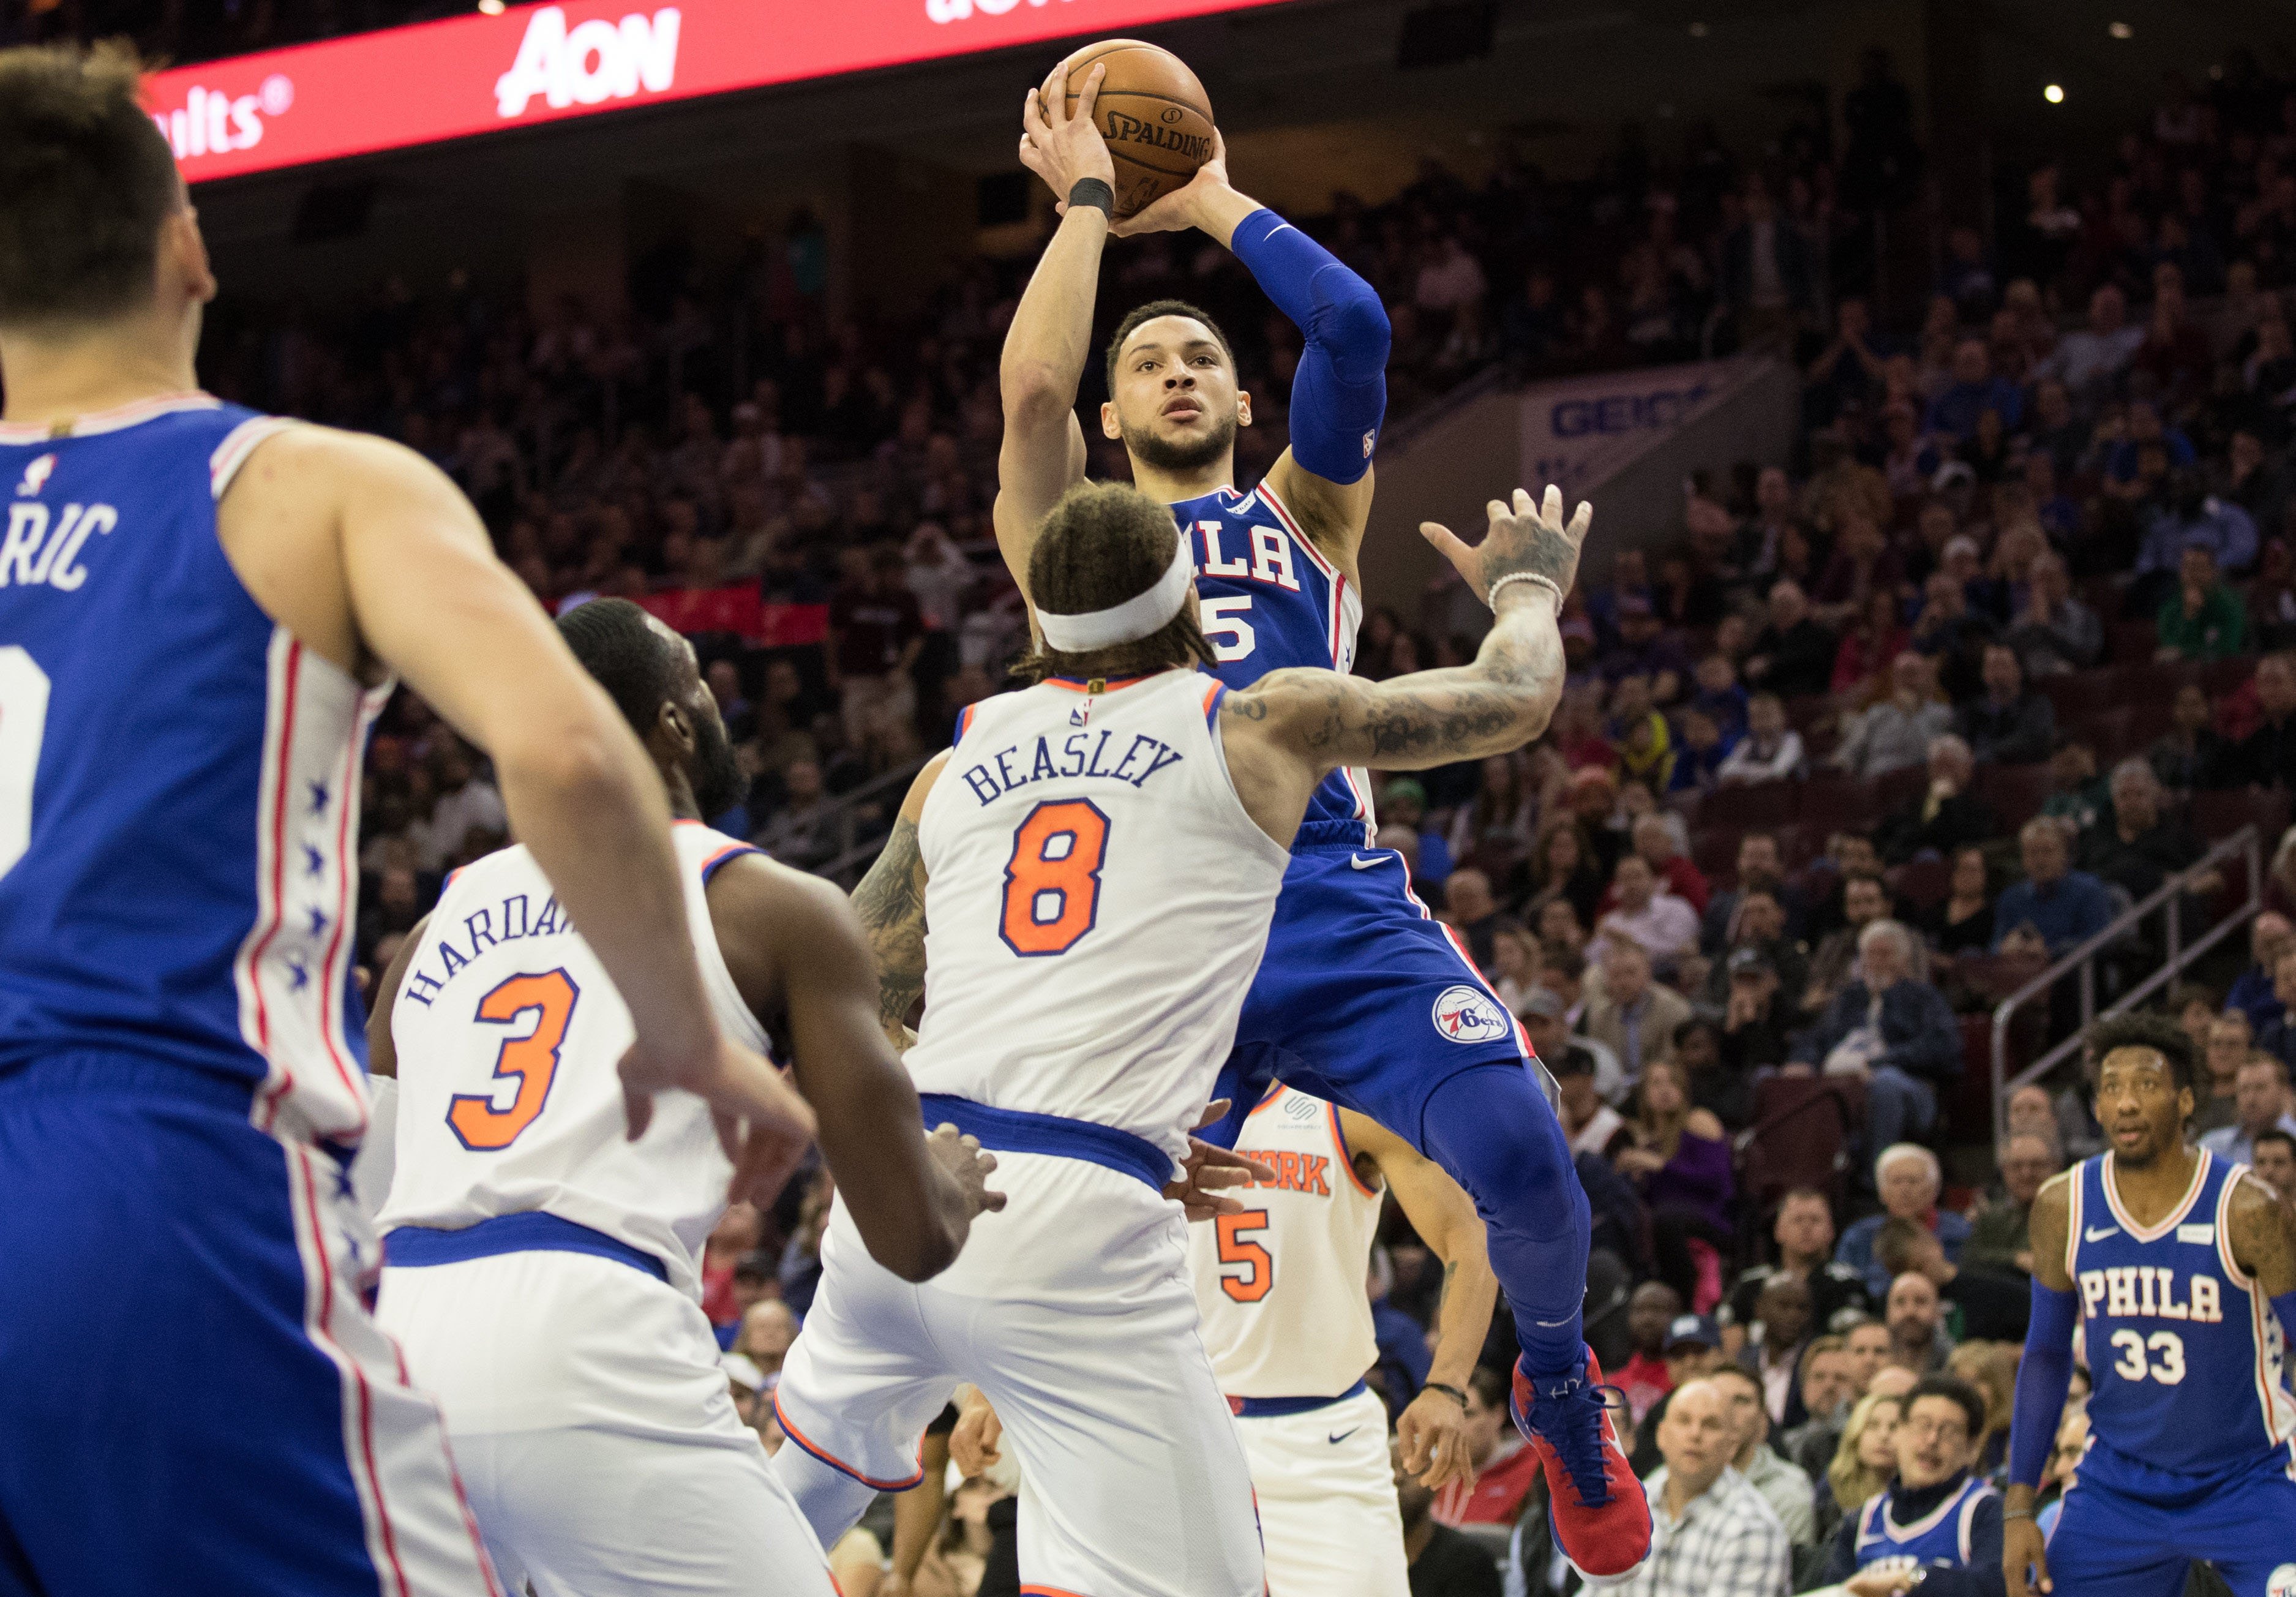 On Ben Simmons, His Shooting, and Annoying Media Questions